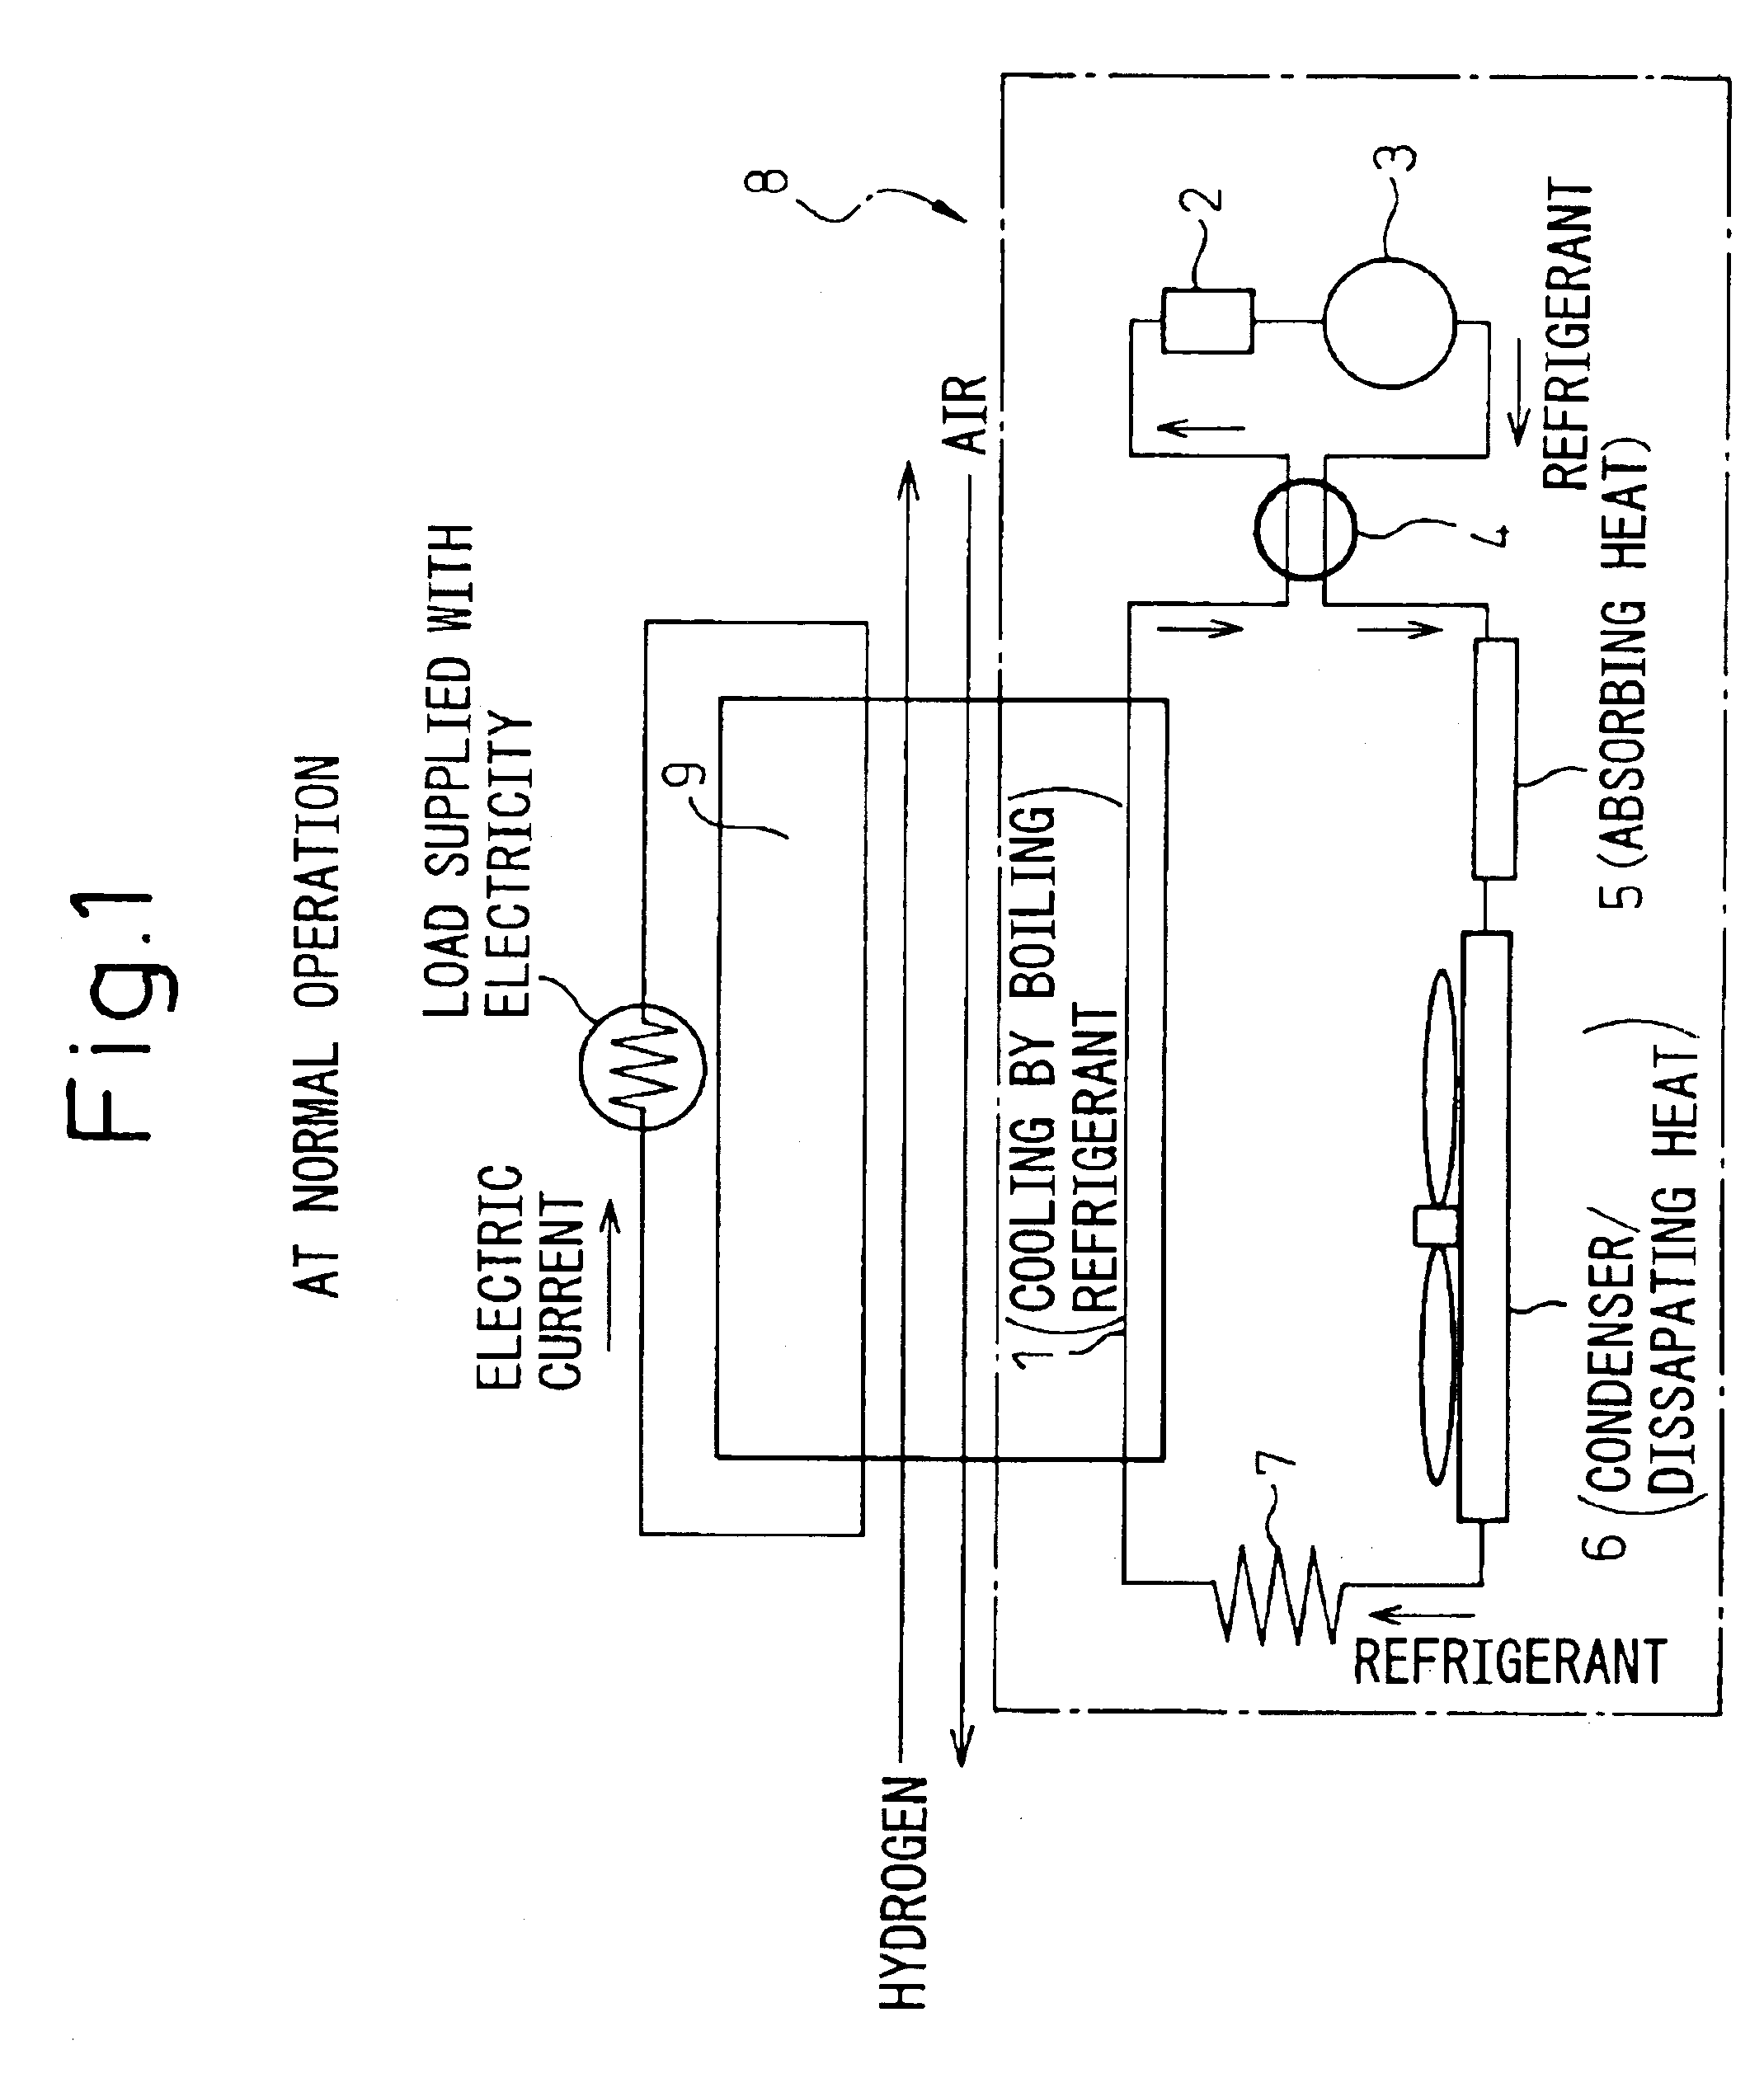 Cooling apparatus for fuel cell utilizing air conditioning system